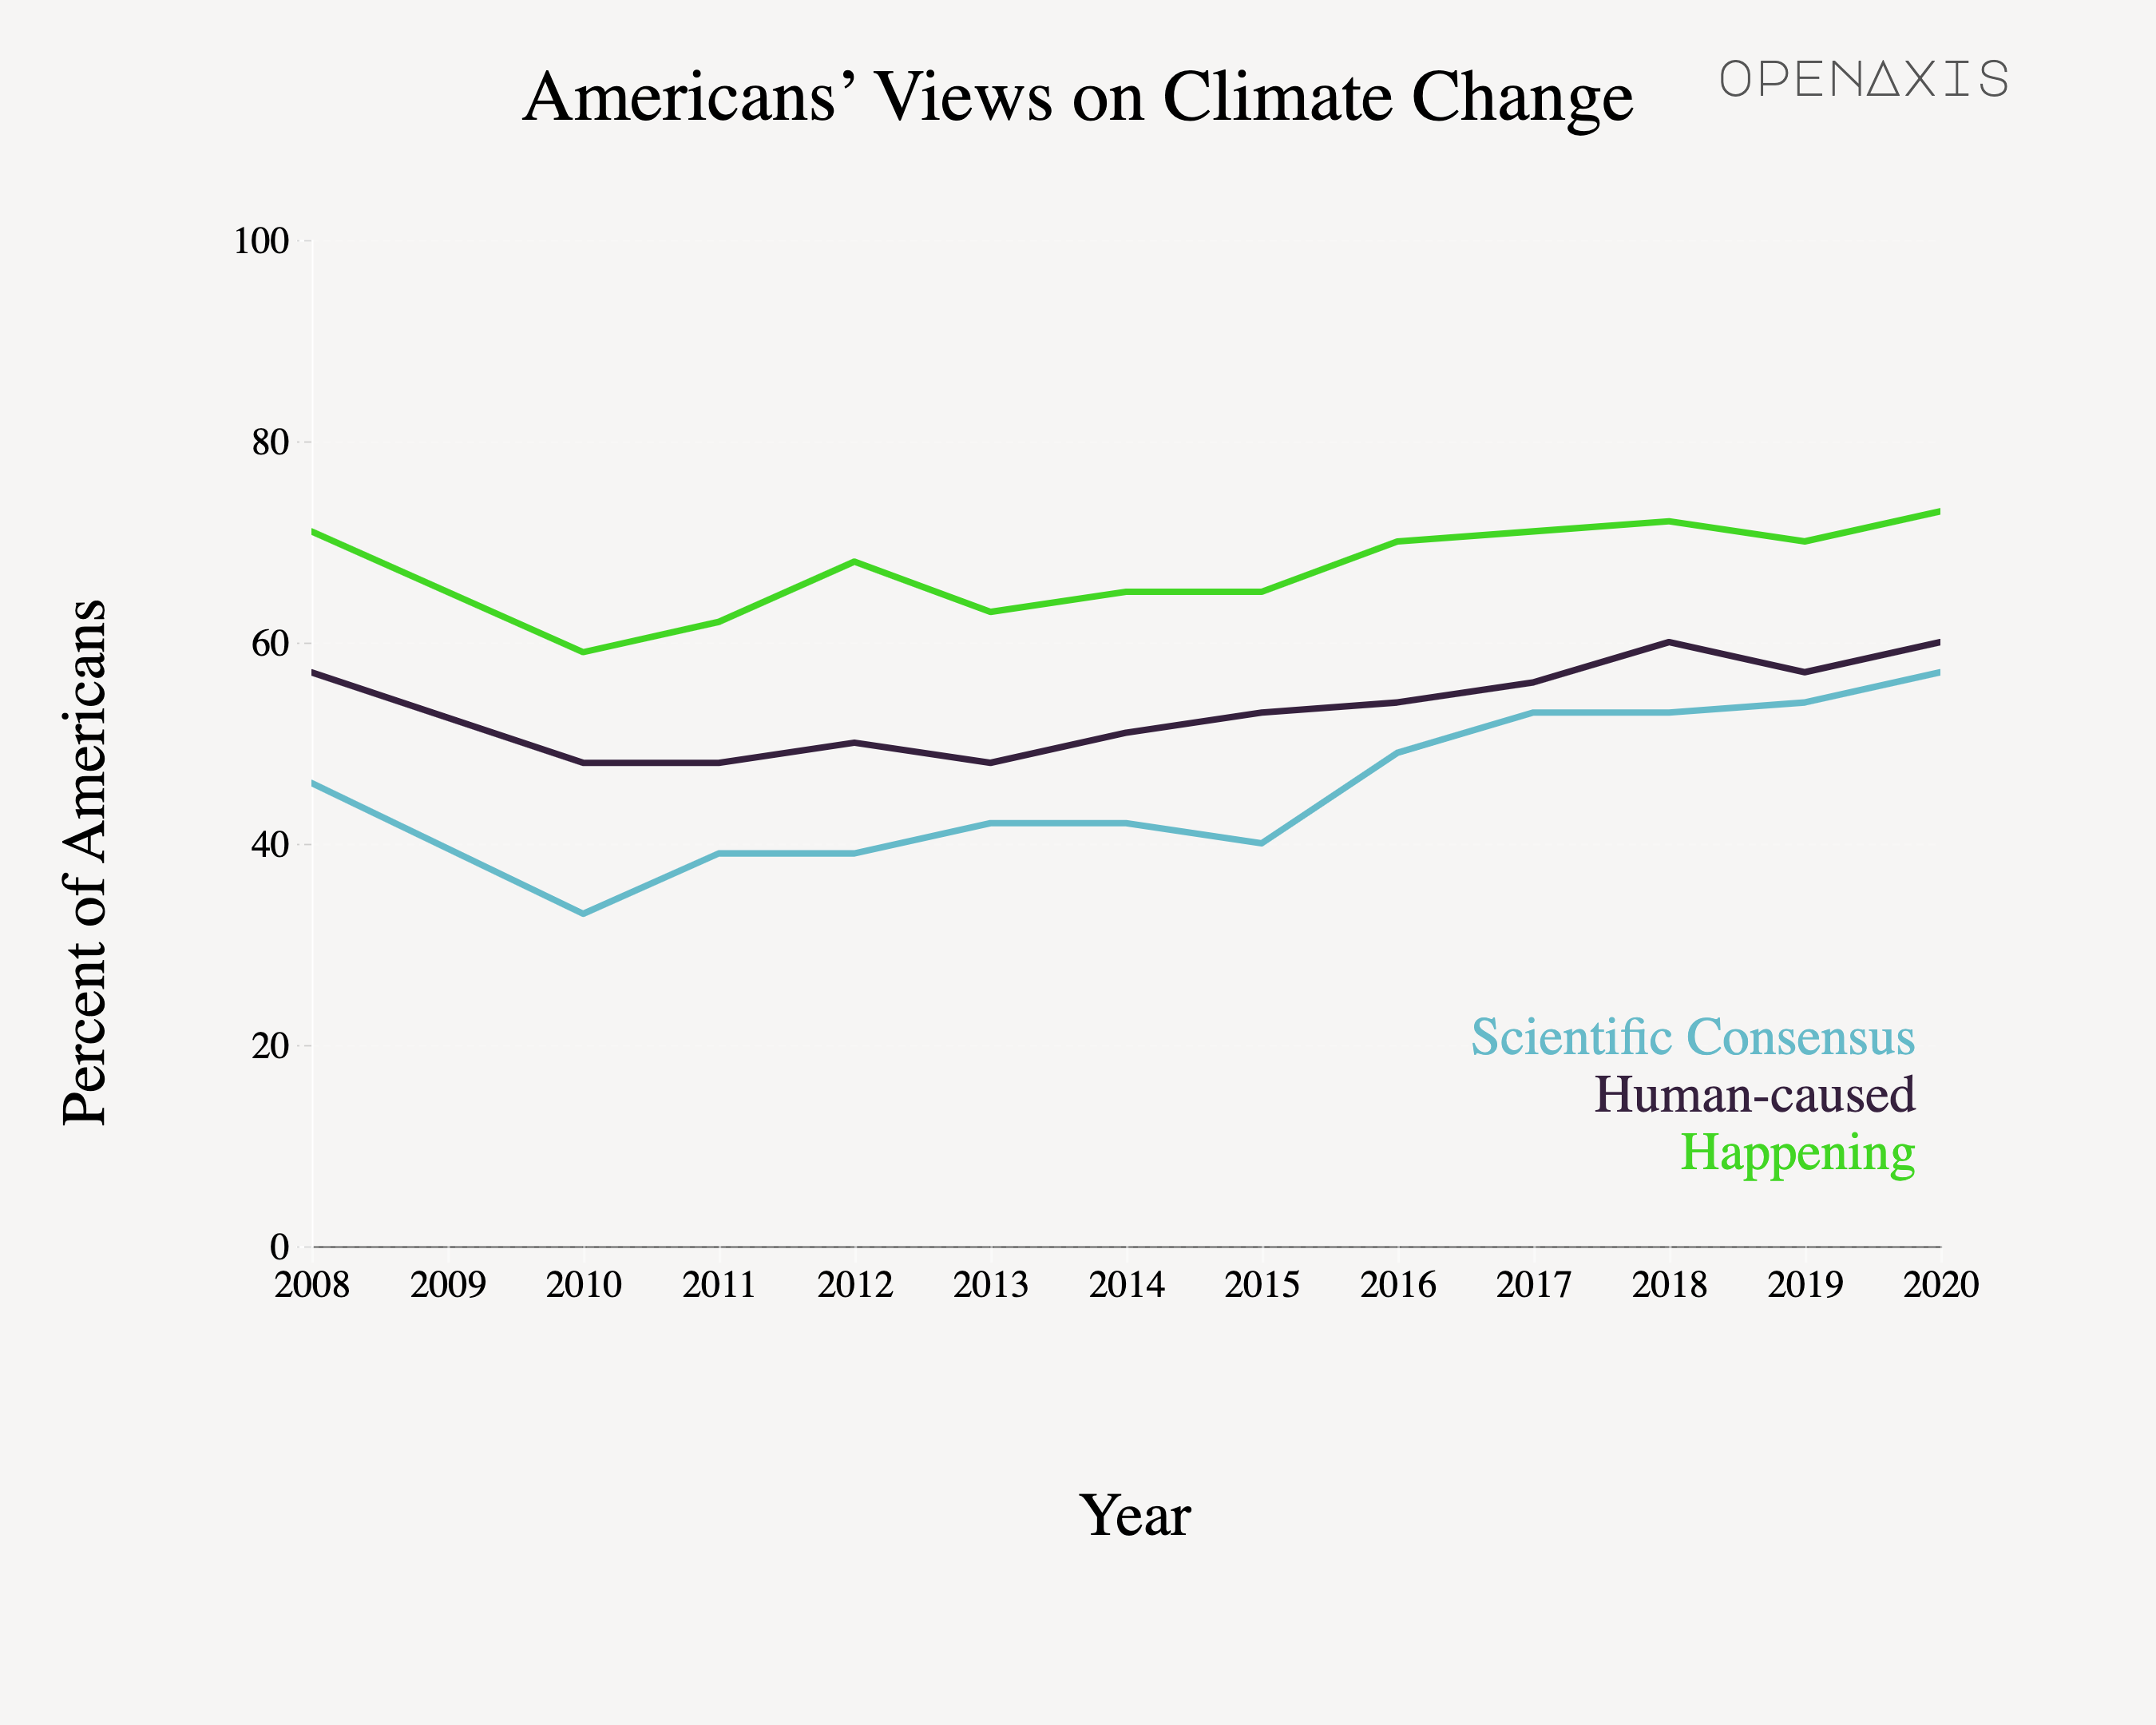 <p>These graphs illustrate national public opinion over time to show the trend of Americans’ views on climate change and how much Americans engage with the issue. In general, America's views on climate change have been increasing since 2010. </p><p><br /></p><p>What the chart tells us:</p><ul><li><strong>73% of Americans believe global warming is happening. </strong></li><li><strong>Assuming global warming is happening, 60% believe it is caused mostly by human activities.</strong></li><li><strong>57% believe Most scientists think global warming is happening</strong></li></ul><p><br /></p><p>Check out the survey questions and methodology<a href="https://climatecommunication.yale.edu/visualizations-data/americans-climate-views/" target="_blank"> here.</a></p><p><br /></p><p>﻿<a href="https://app.openaxis.com/search?q=%23climatechange" target="_blank">#climatechange</a>﻿ </p><p><br /></p><p>Source: Yale Program on Climate Change Communication</p>